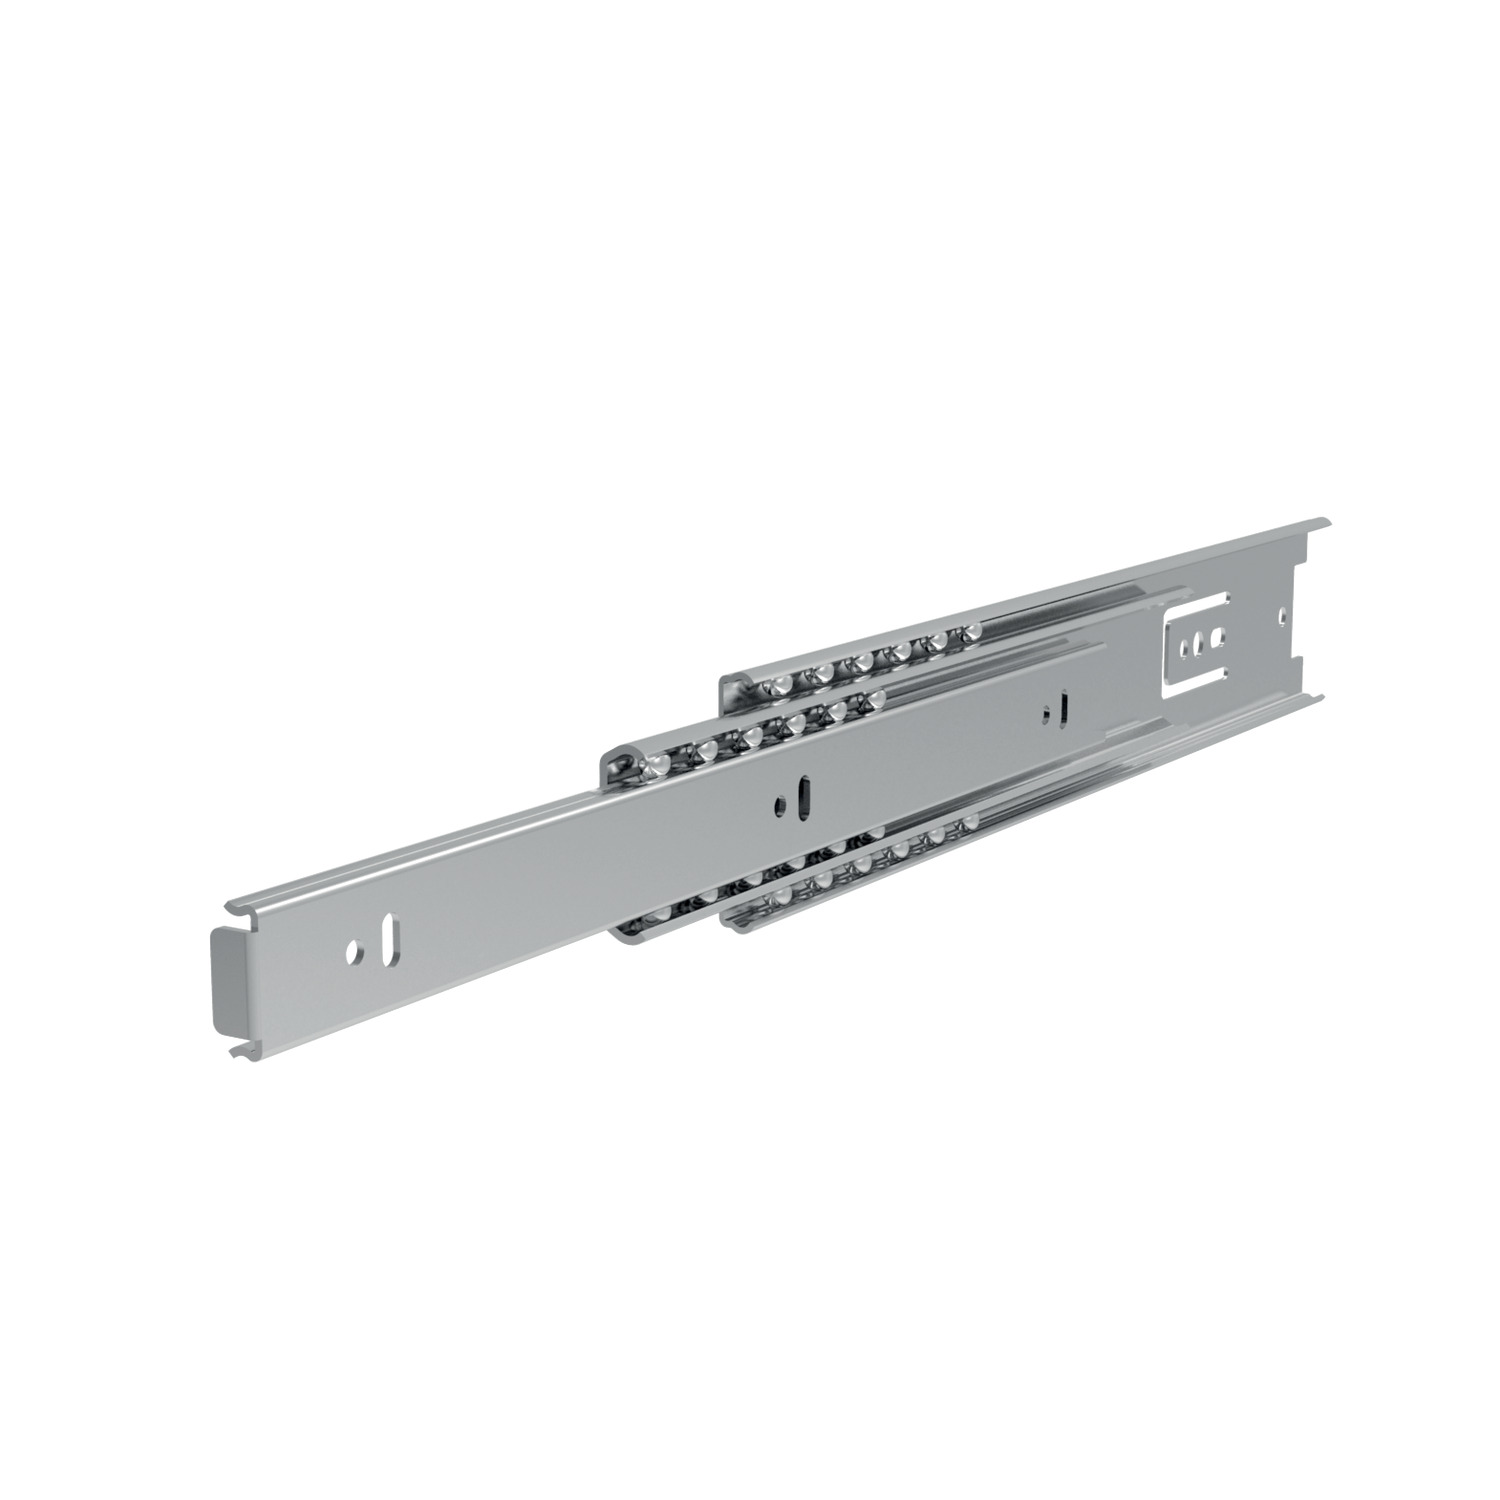 Fully Telescopic Drawer Slides Steel, zinc plated drawer slides, loads up to 20Kg per pair. Hardened steel balls with steel and plastic ball cage. Separate inner rail.